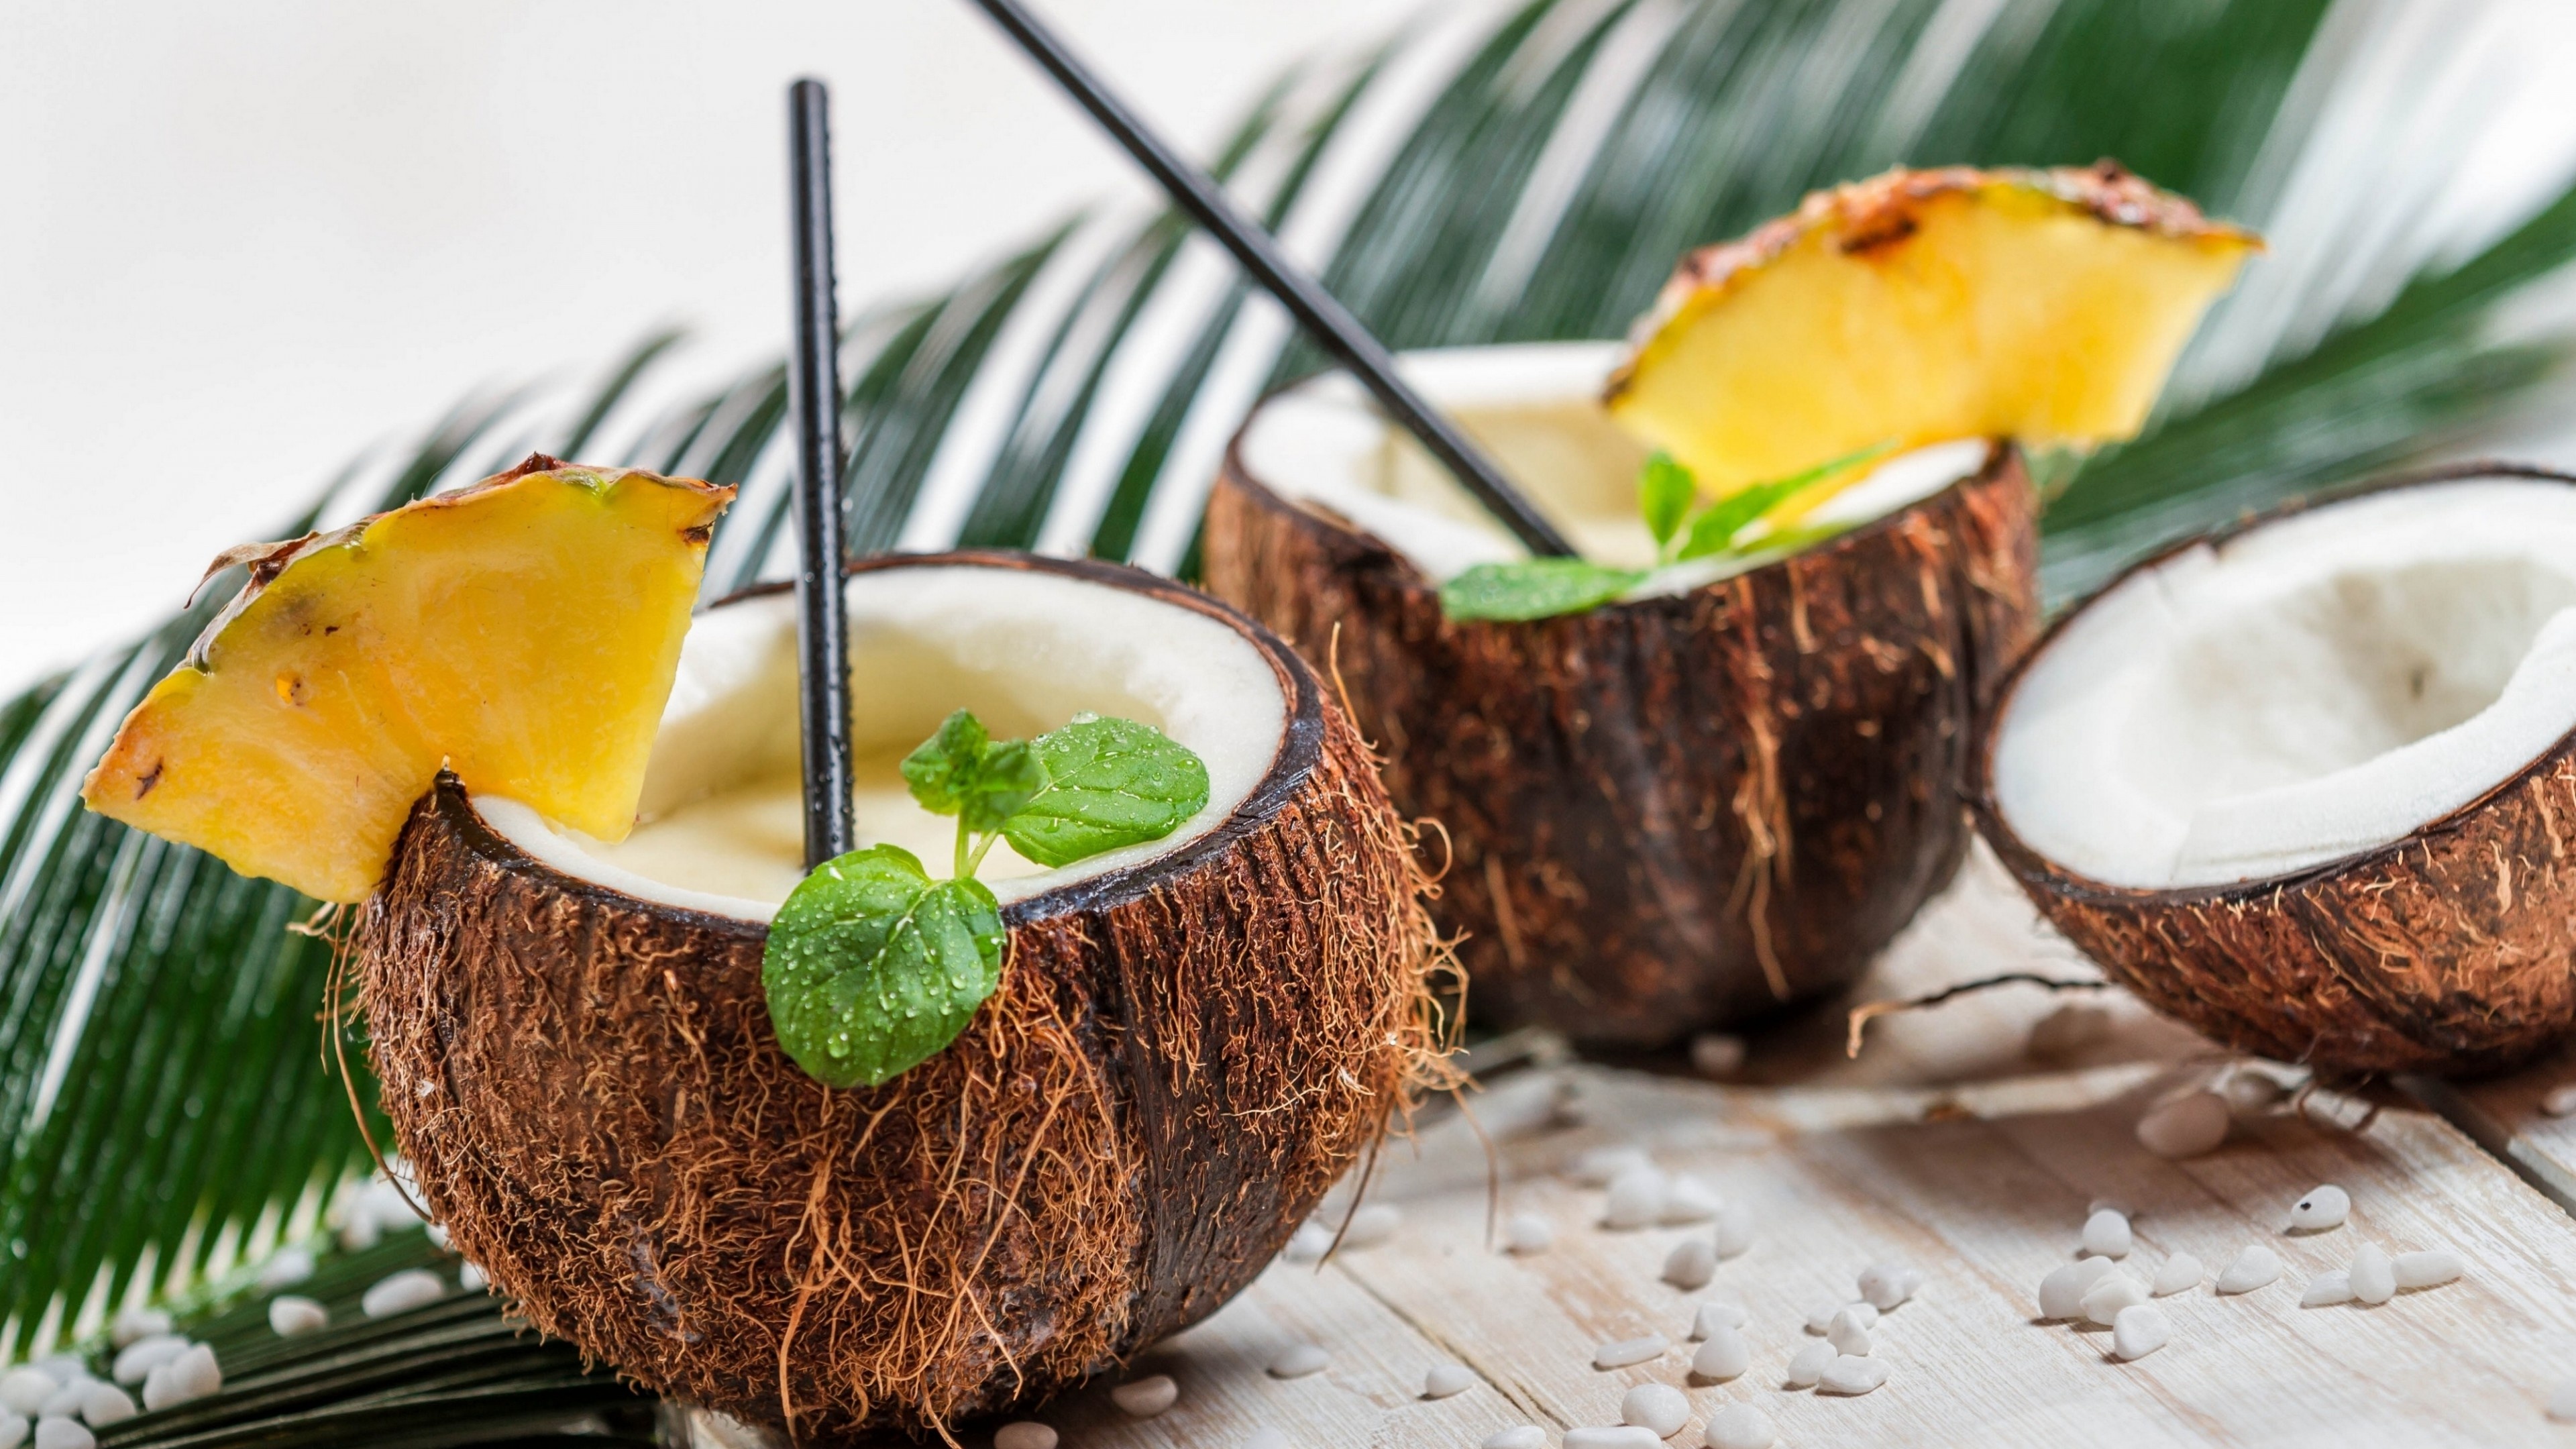 Coconut: Pina colada, Coconuts, Pineapple, Cocktail. 3840x2160 4K Background.